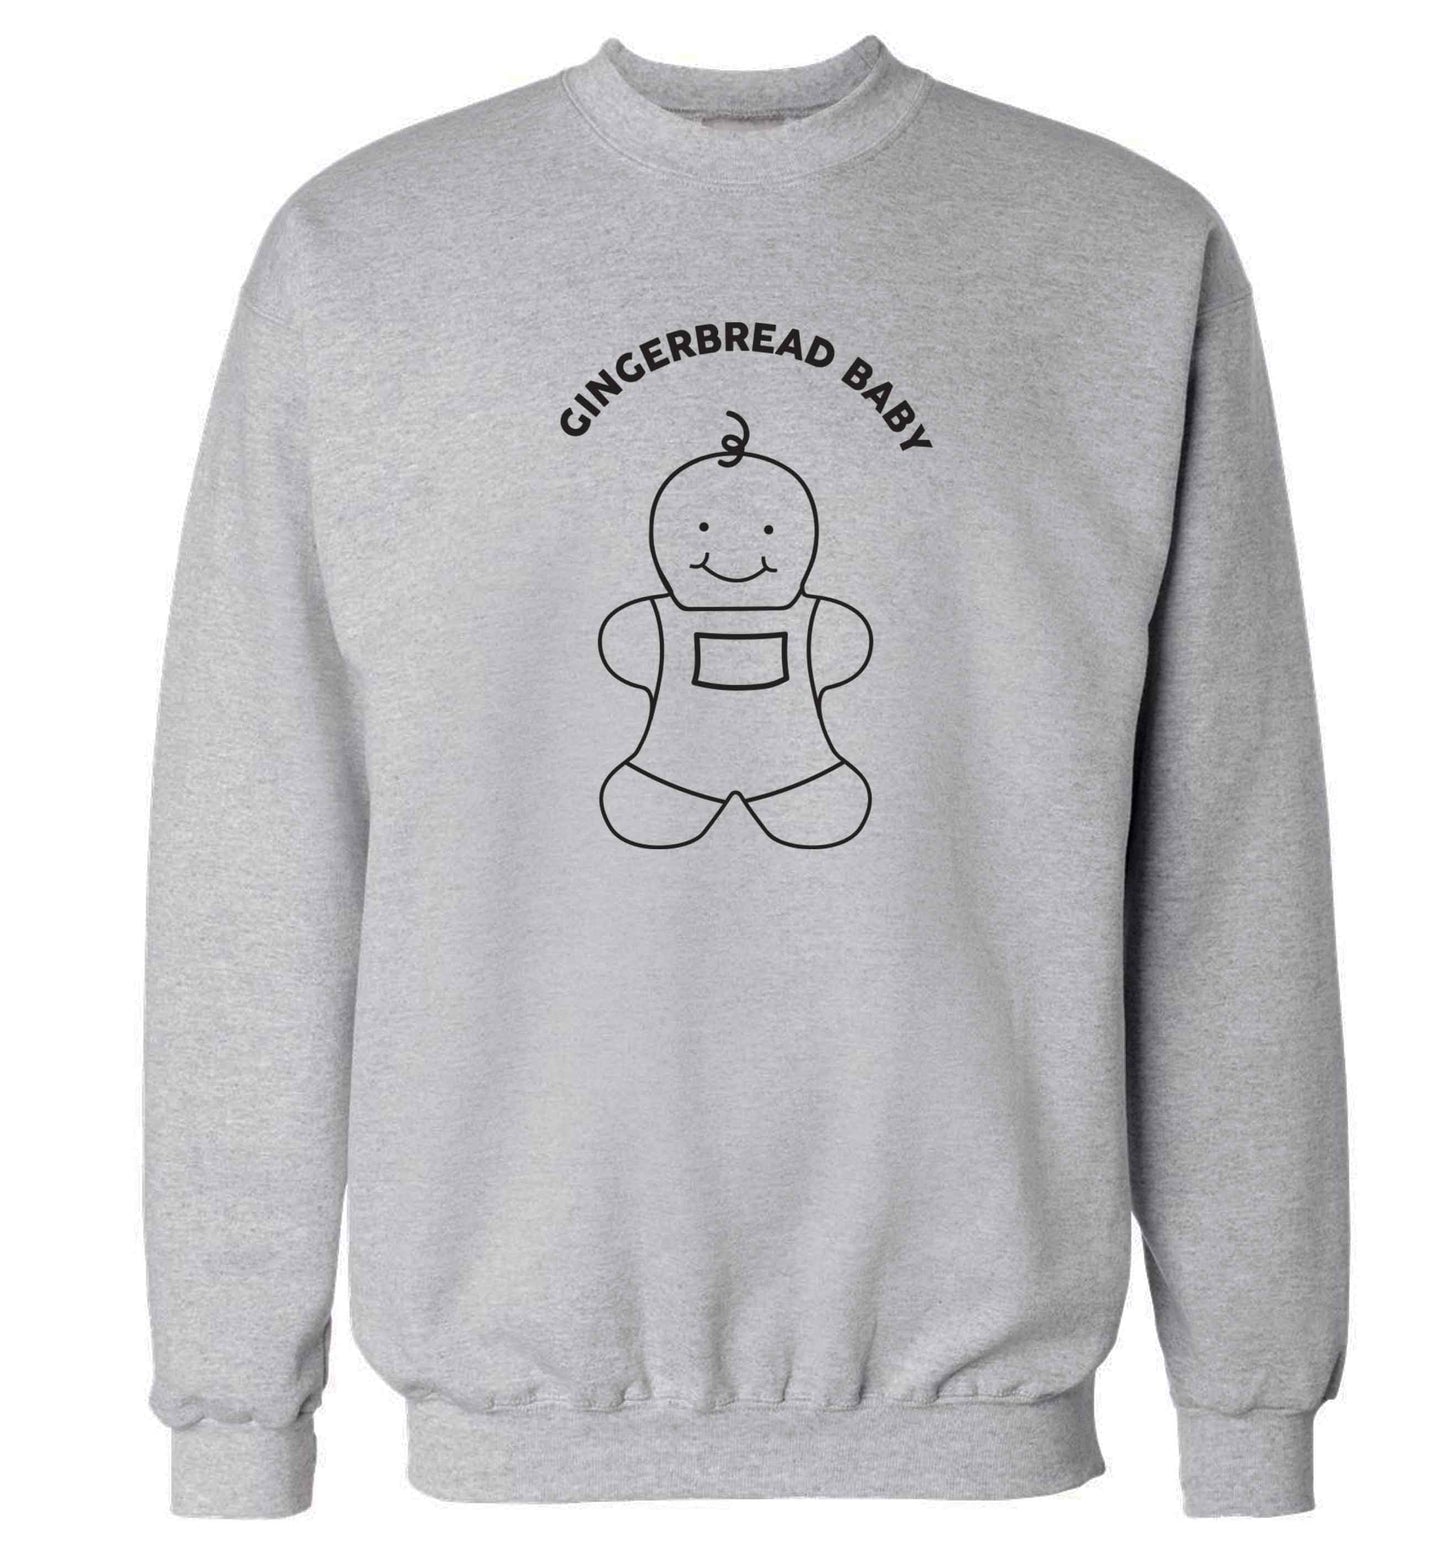 Gingerbread baby adult's unisex grey sweater 2XL